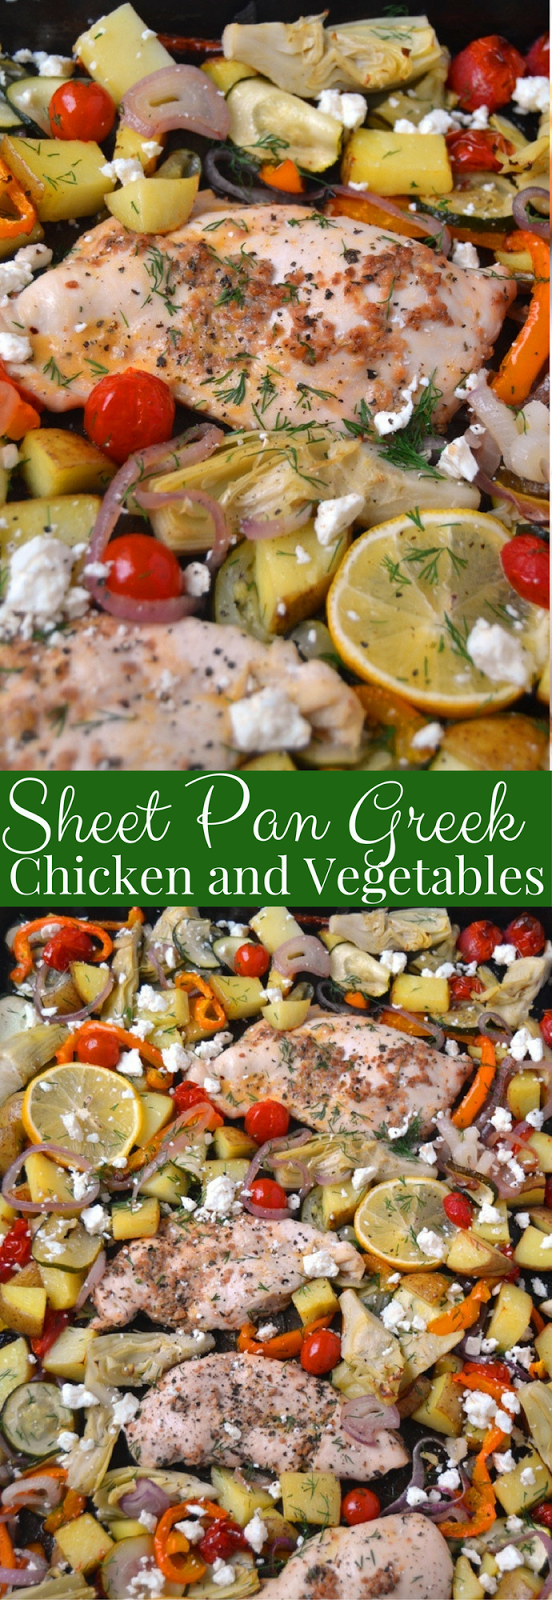 Sheet Pan Greek Chicken and Vegetables is a delicious one-pan meal with roasted potatoes, onions, bell peppers, tomatoes, zucchini, artichokes and feta cheese with dill, lemon and garlic. www.nutritionistreviews.com